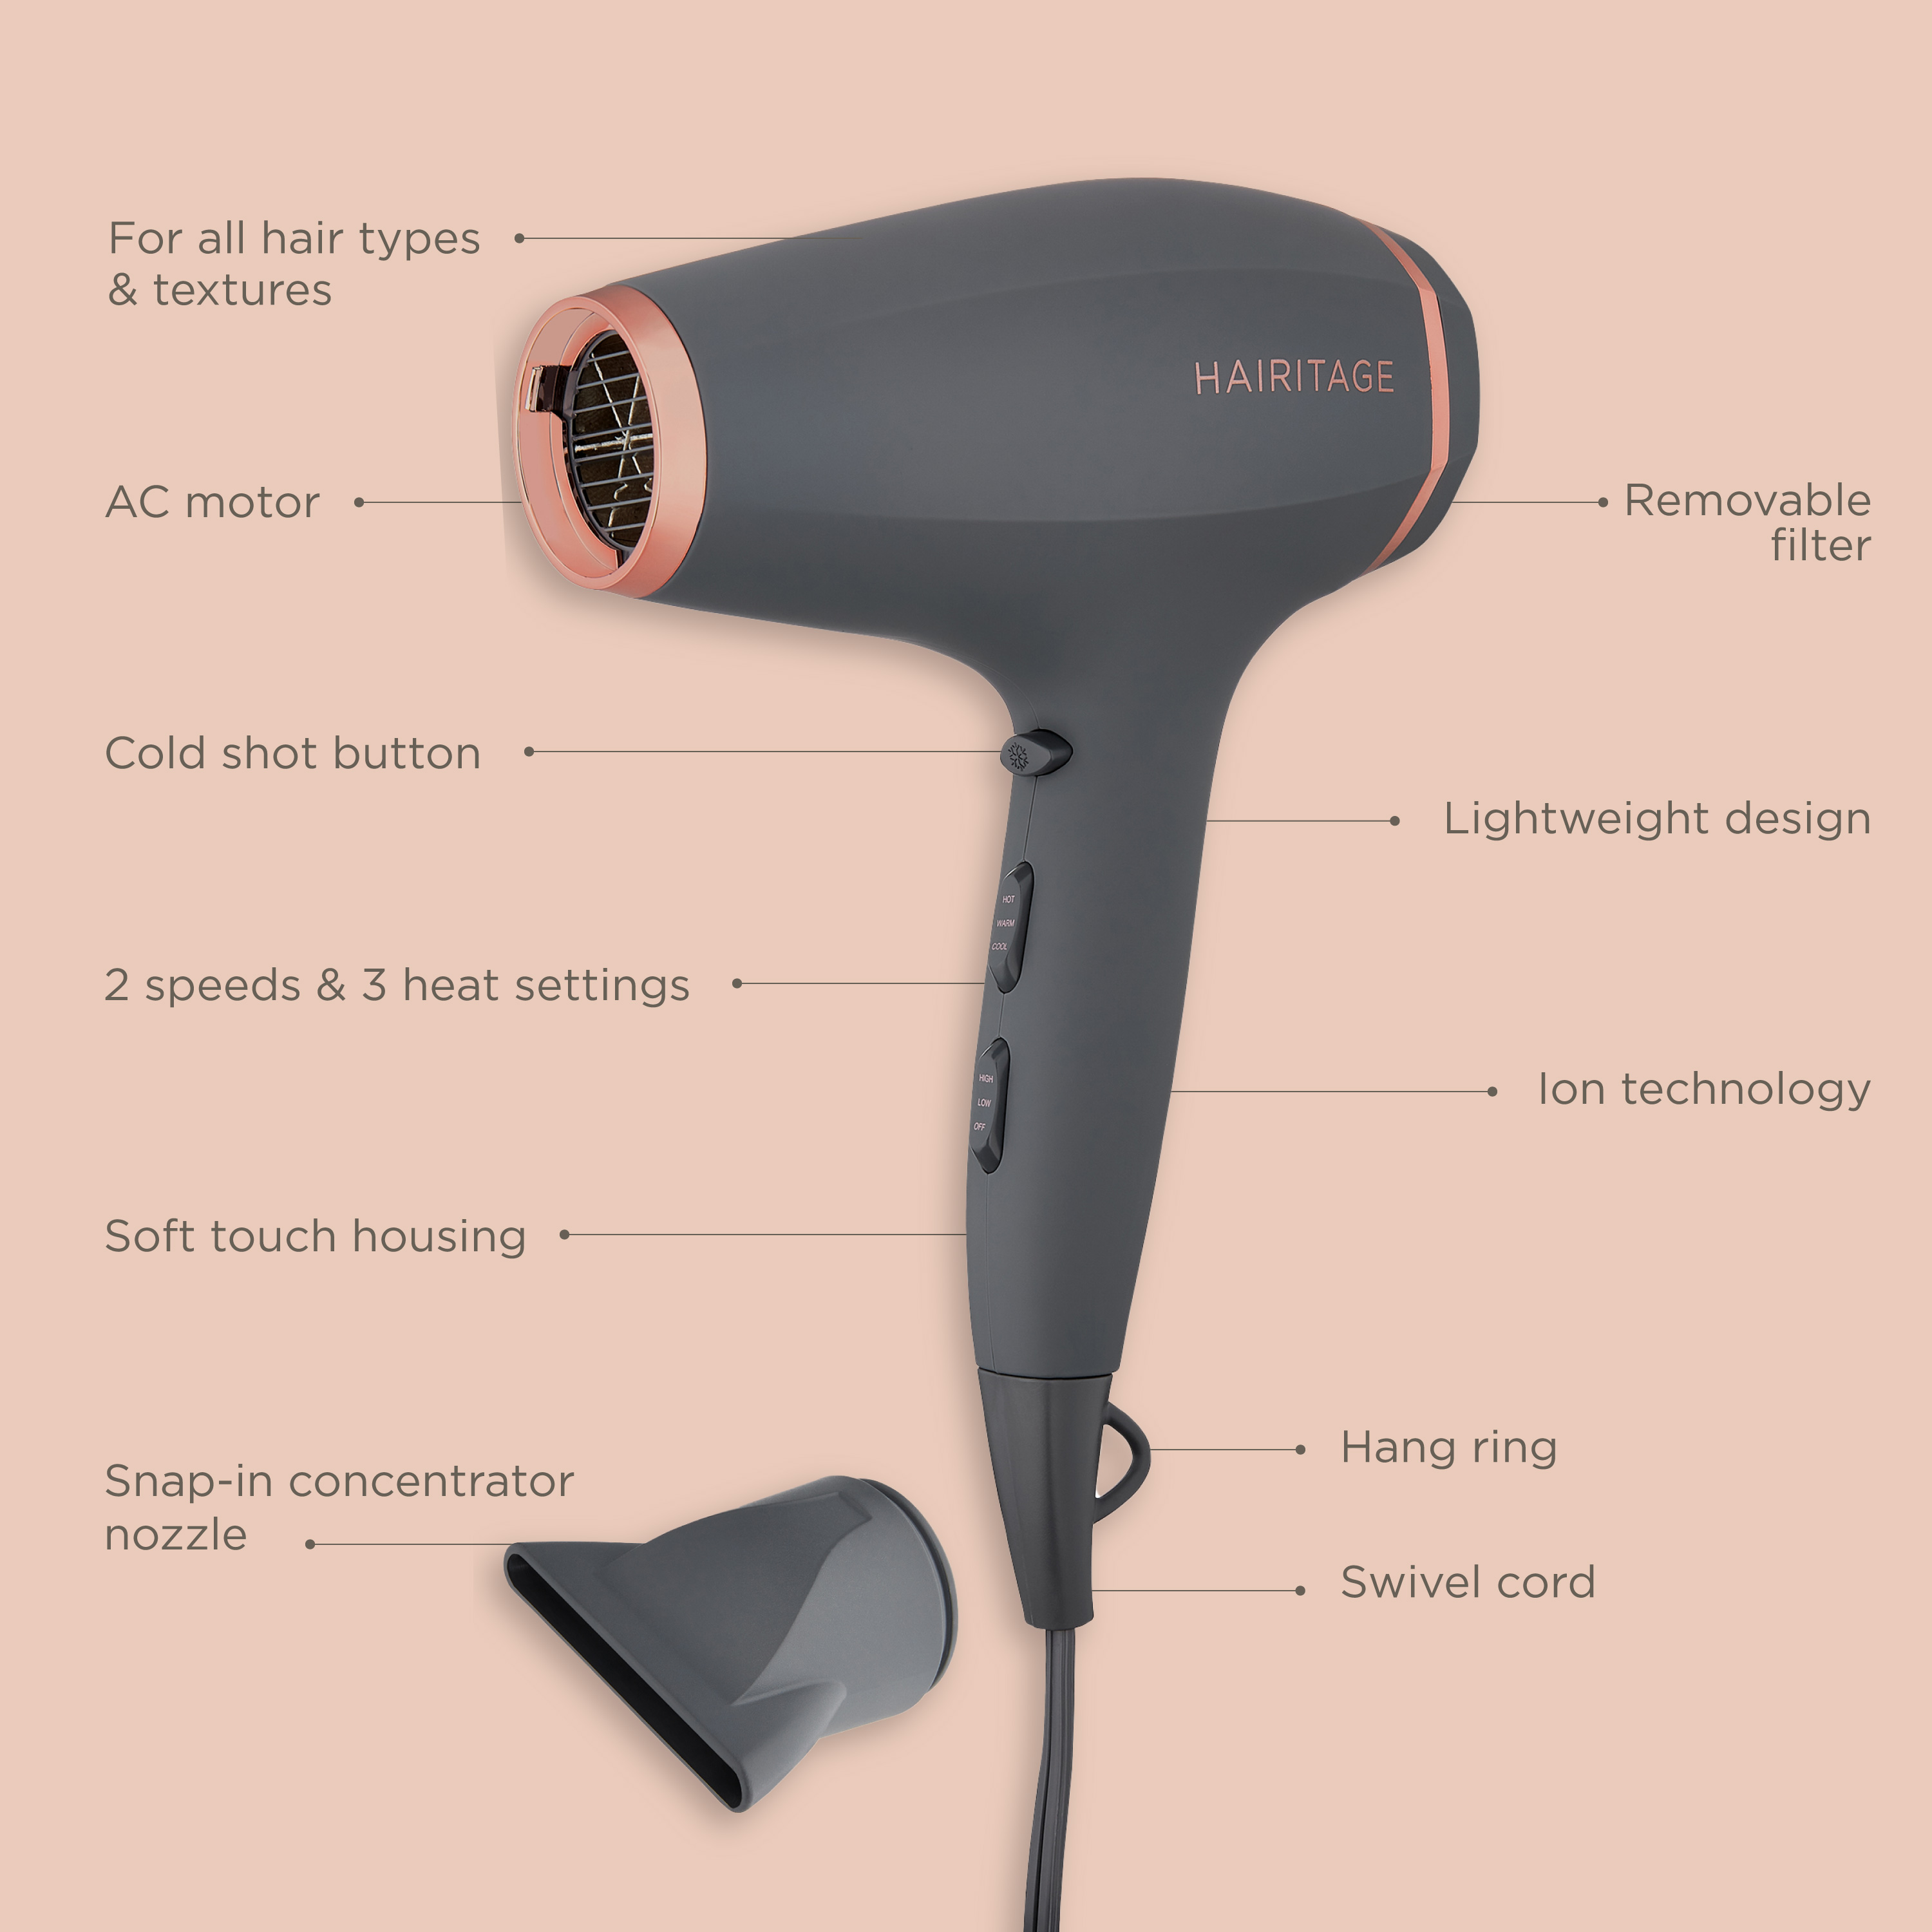 Hairitage Comin' In Hot Hair Dryer |1875 Watts Ionic Hair Dryer for Frizz Control & Shine | Powerful Blow Dryer for All Hair Types - image 7 of 7